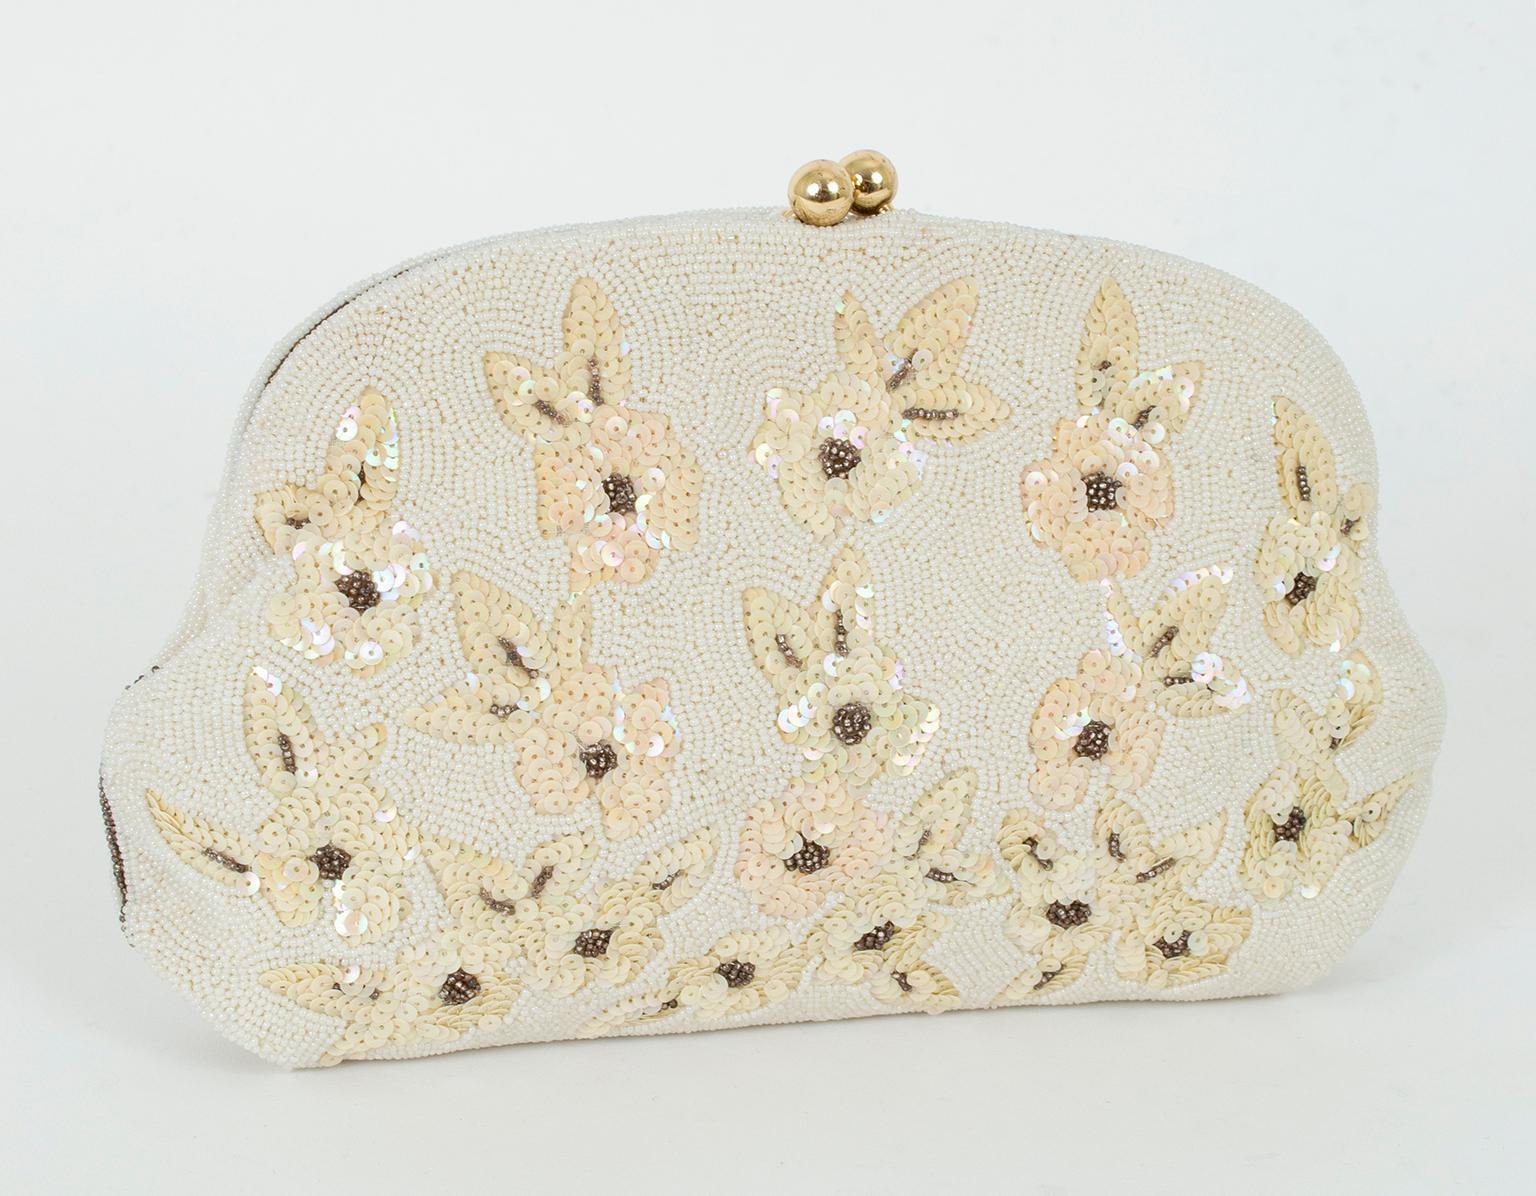 Completely hand beaded, this ladylike evening clutch by the coveted French brand Josef features a pavé caviar ground punctuated by ivory sequin flowers with gold bead centers both front and back. Despite its painstaking and delicate craftsmanship,